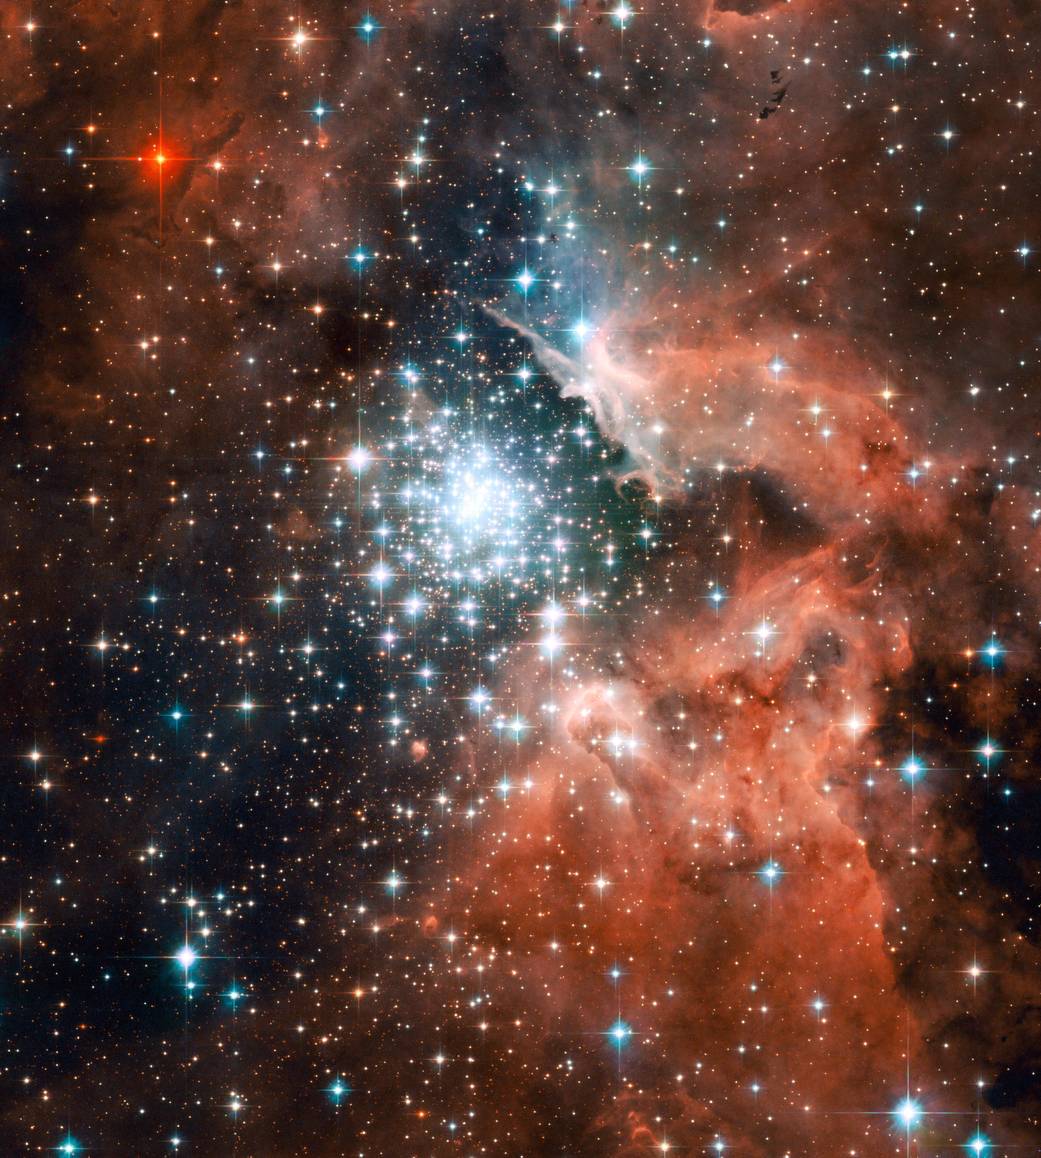 Open cluster NGC 3603 in Carina